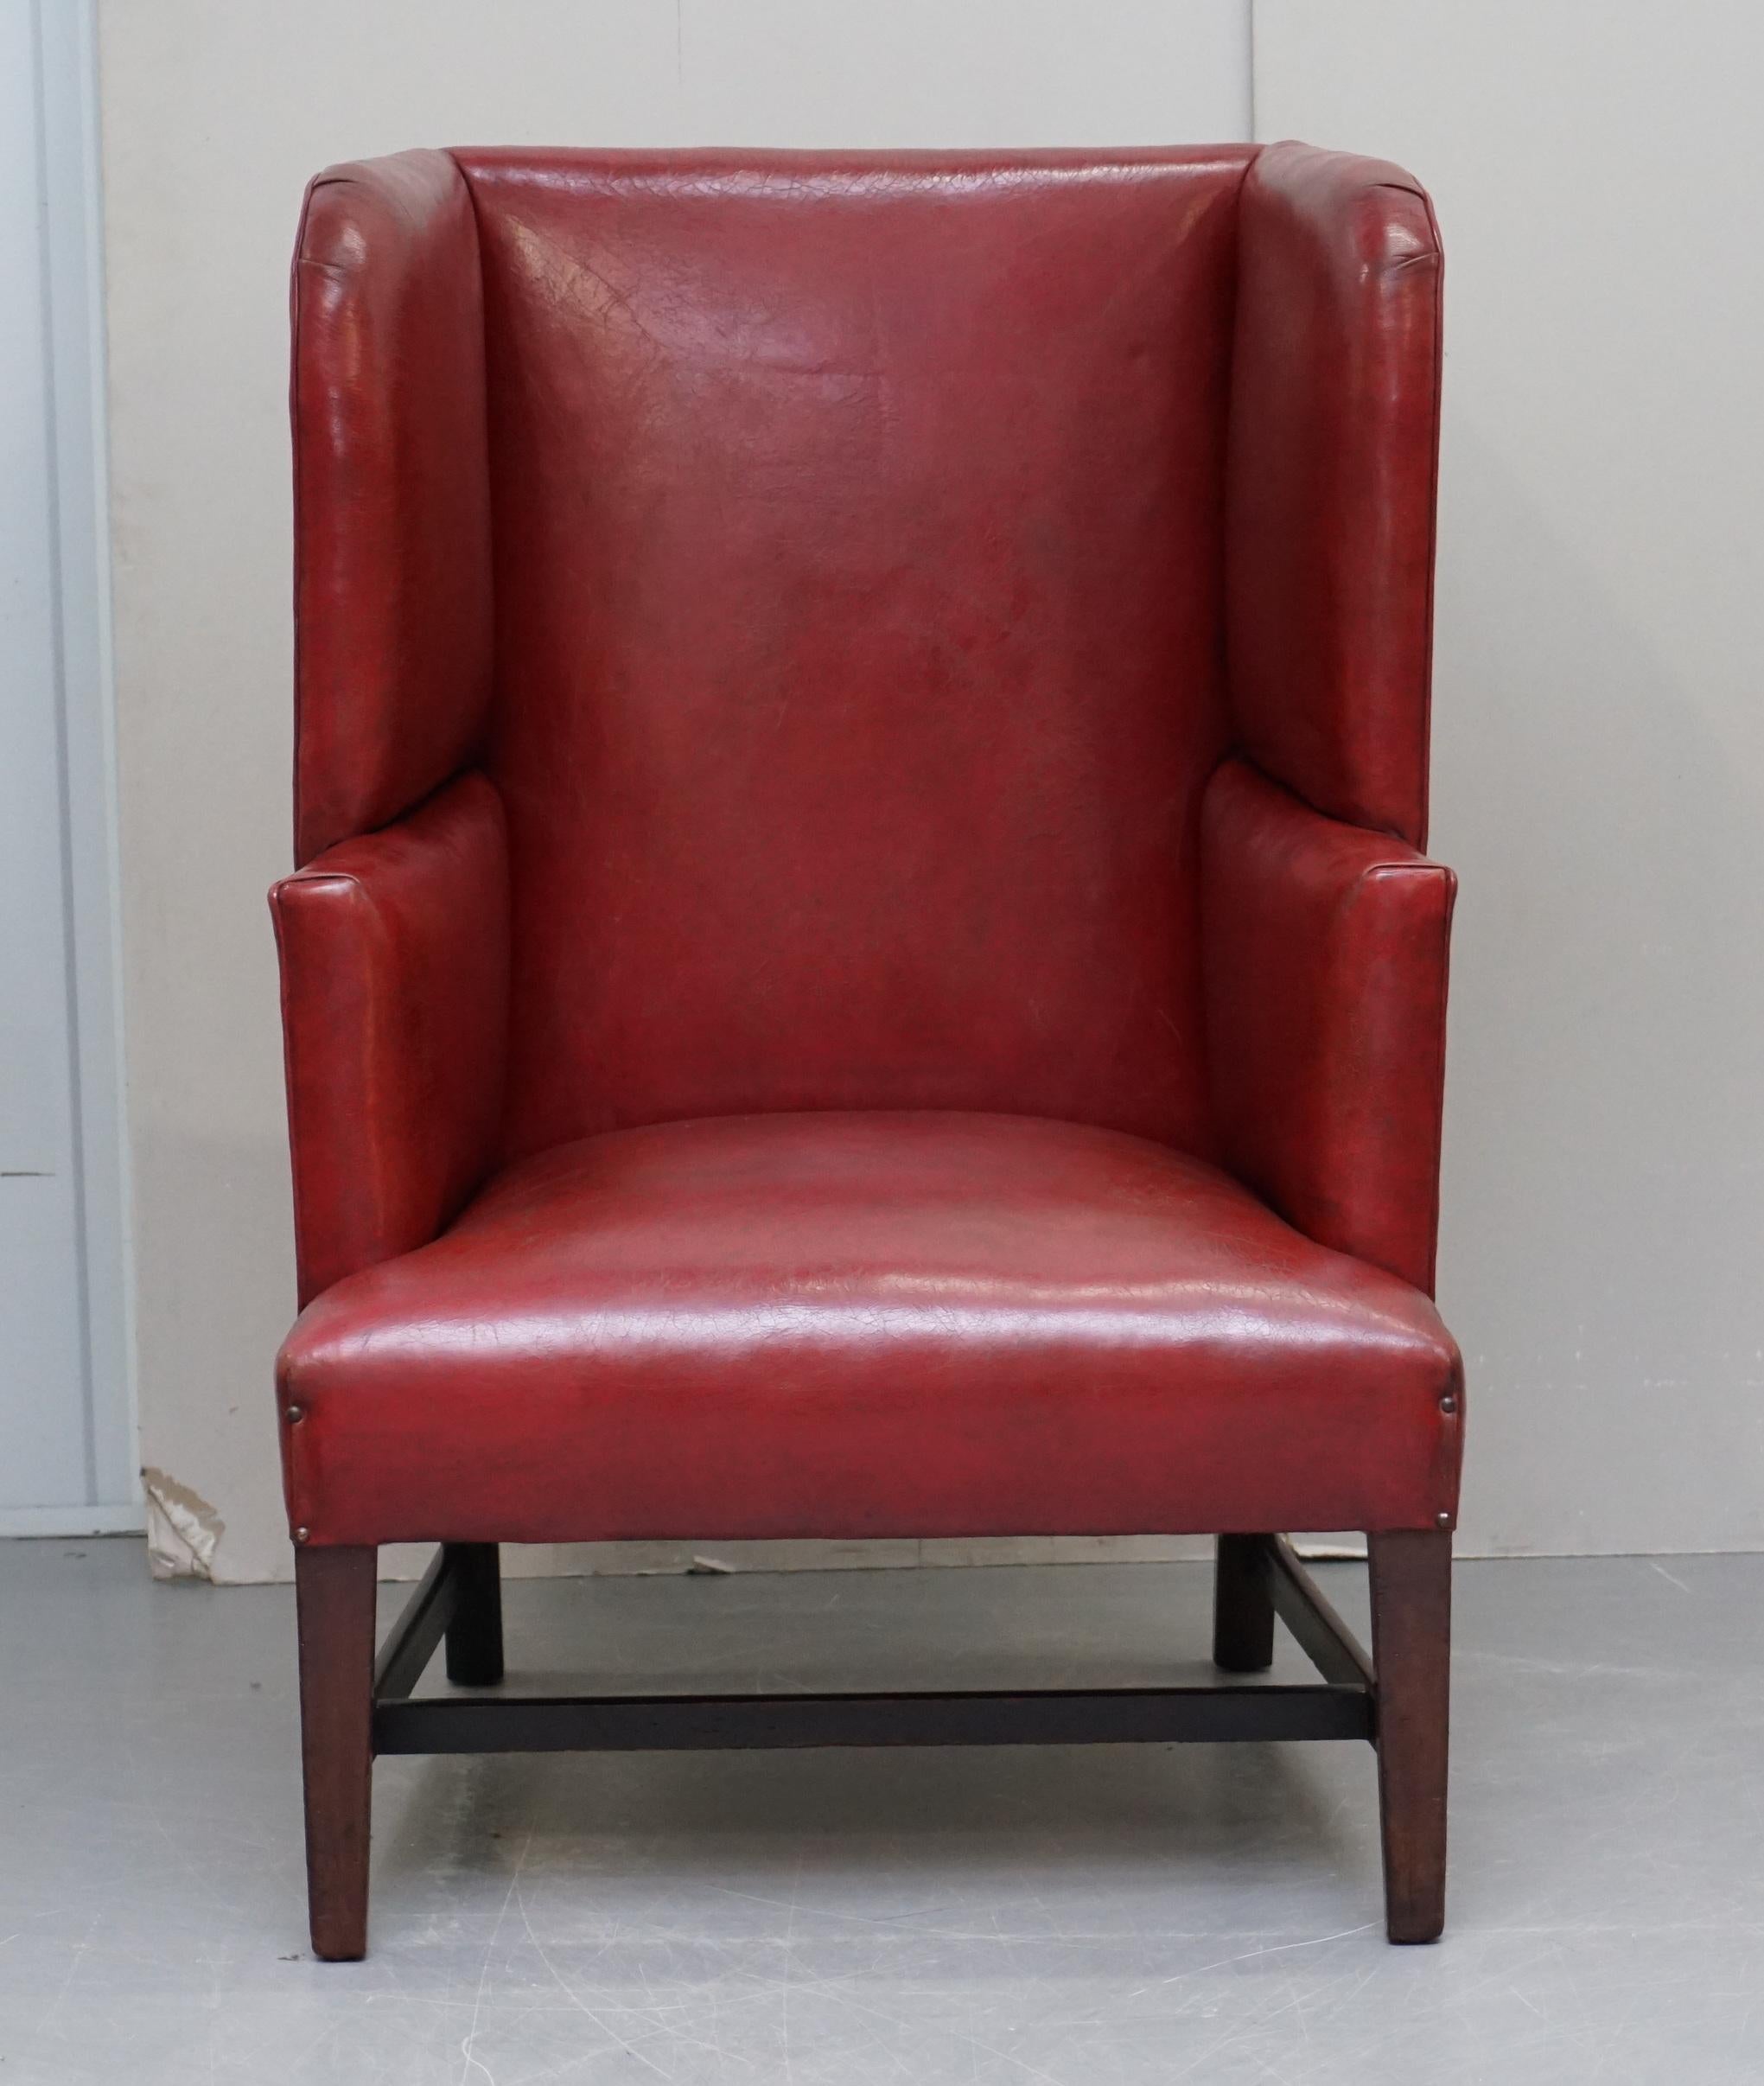 We are delighted to offer for sale this stunning Postbox red leather Georgian Porters wingback armchair, circa 1780.

A very good looking and highly decorative piece. This is an original Georgian circa 1780 armchair, the seat platform is all coil